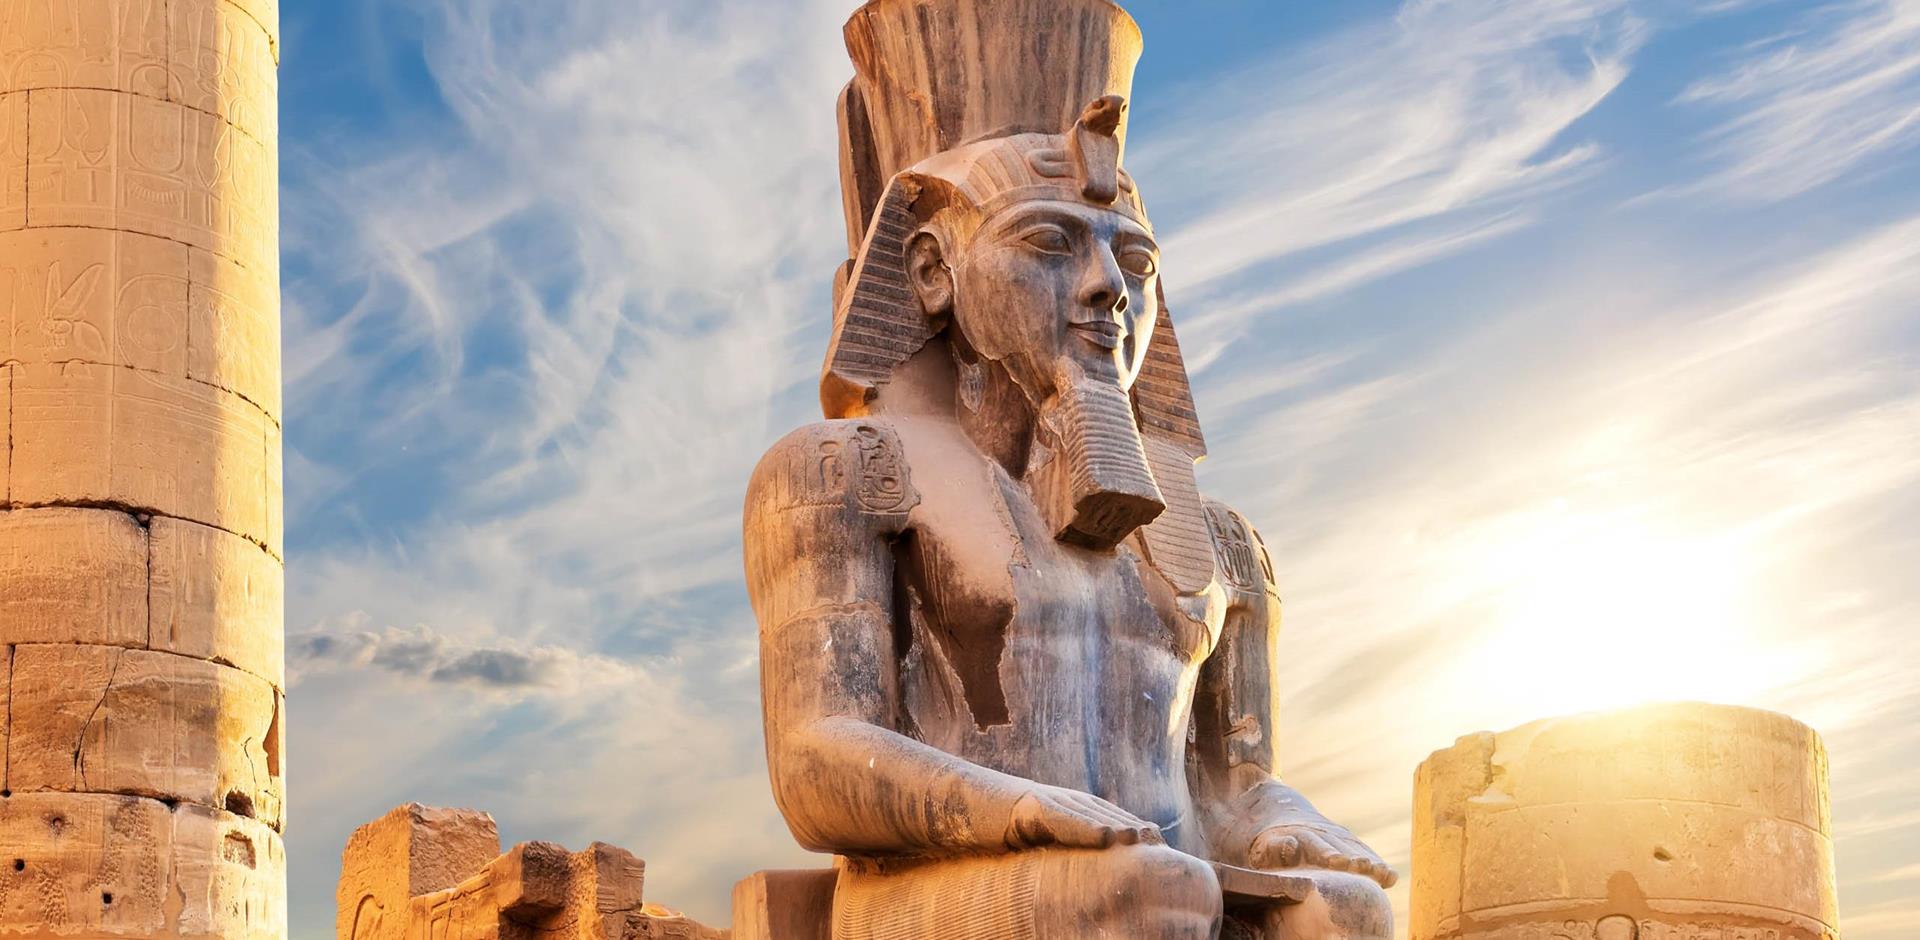 Seated statue of Ramesses II by the Luxor Temple entrance, Luxor, Egypt, Middle East - Northeast Africa